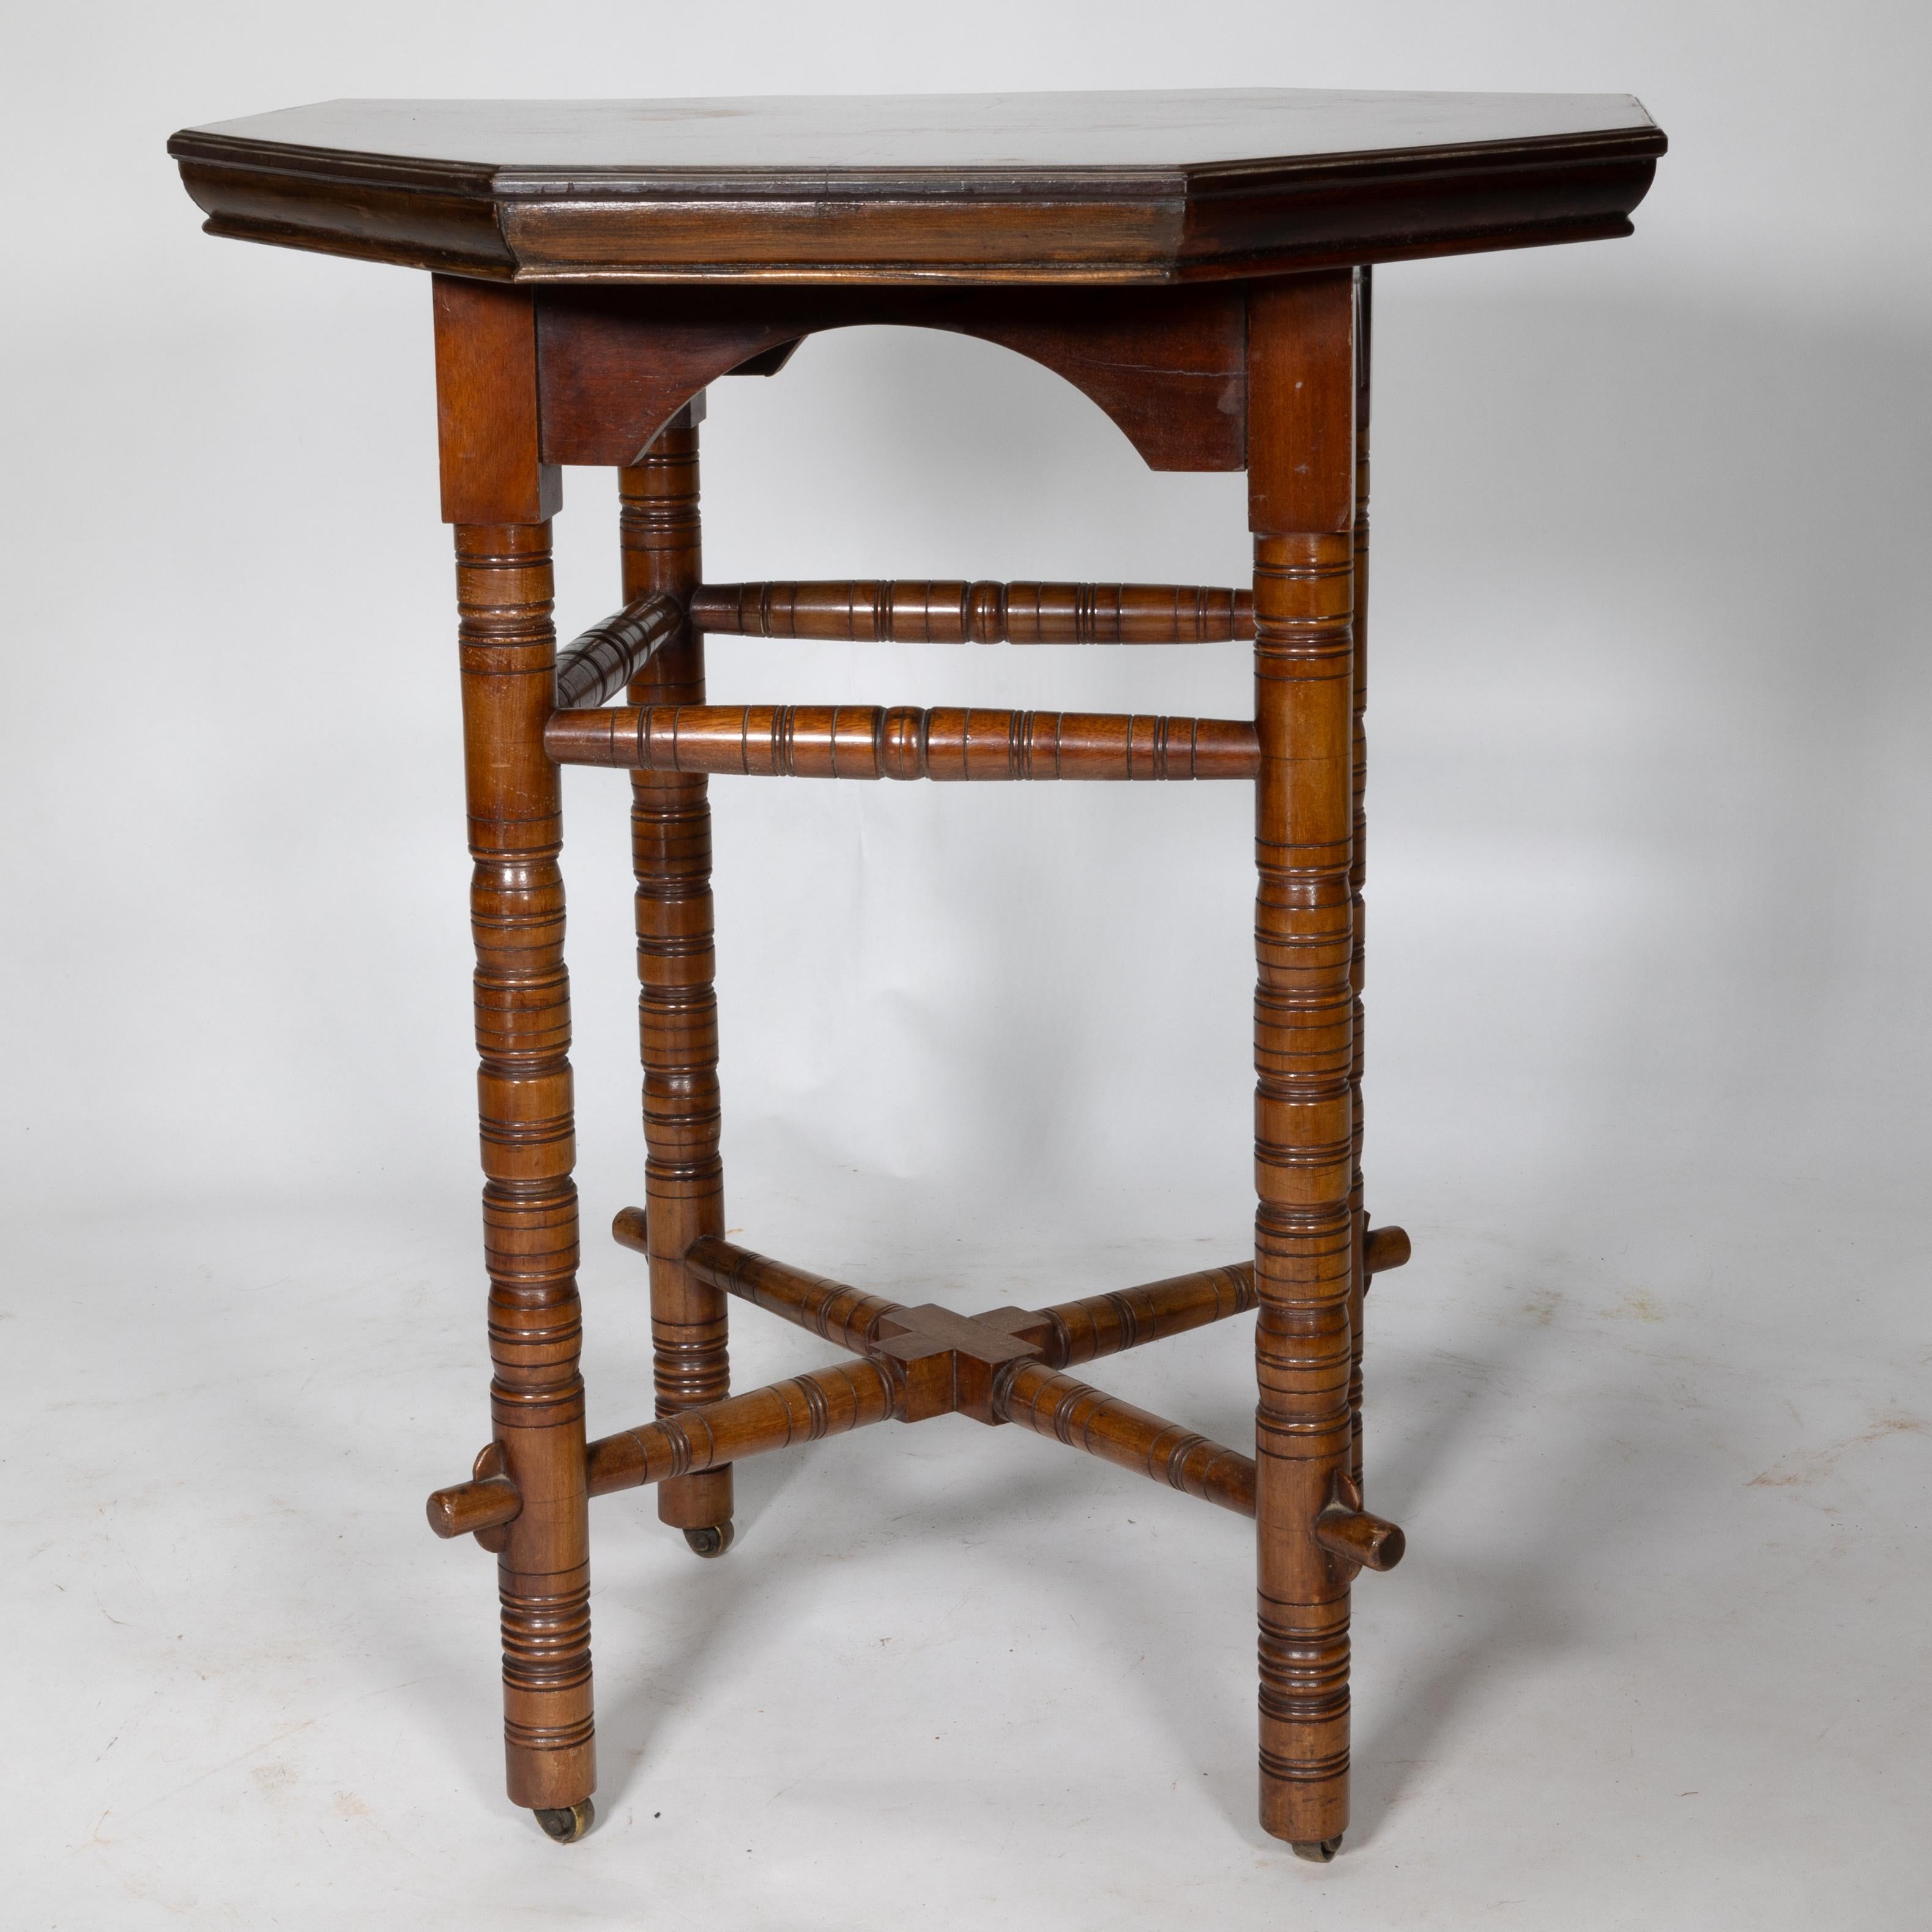 E.W. Godwin in the style of.An Aesthetic Movement Walnut octagonal centre or side table with arched apron below the top, the legs united by upper stretchers and also united by a lower a cross stretcher which follows through the lower legs with